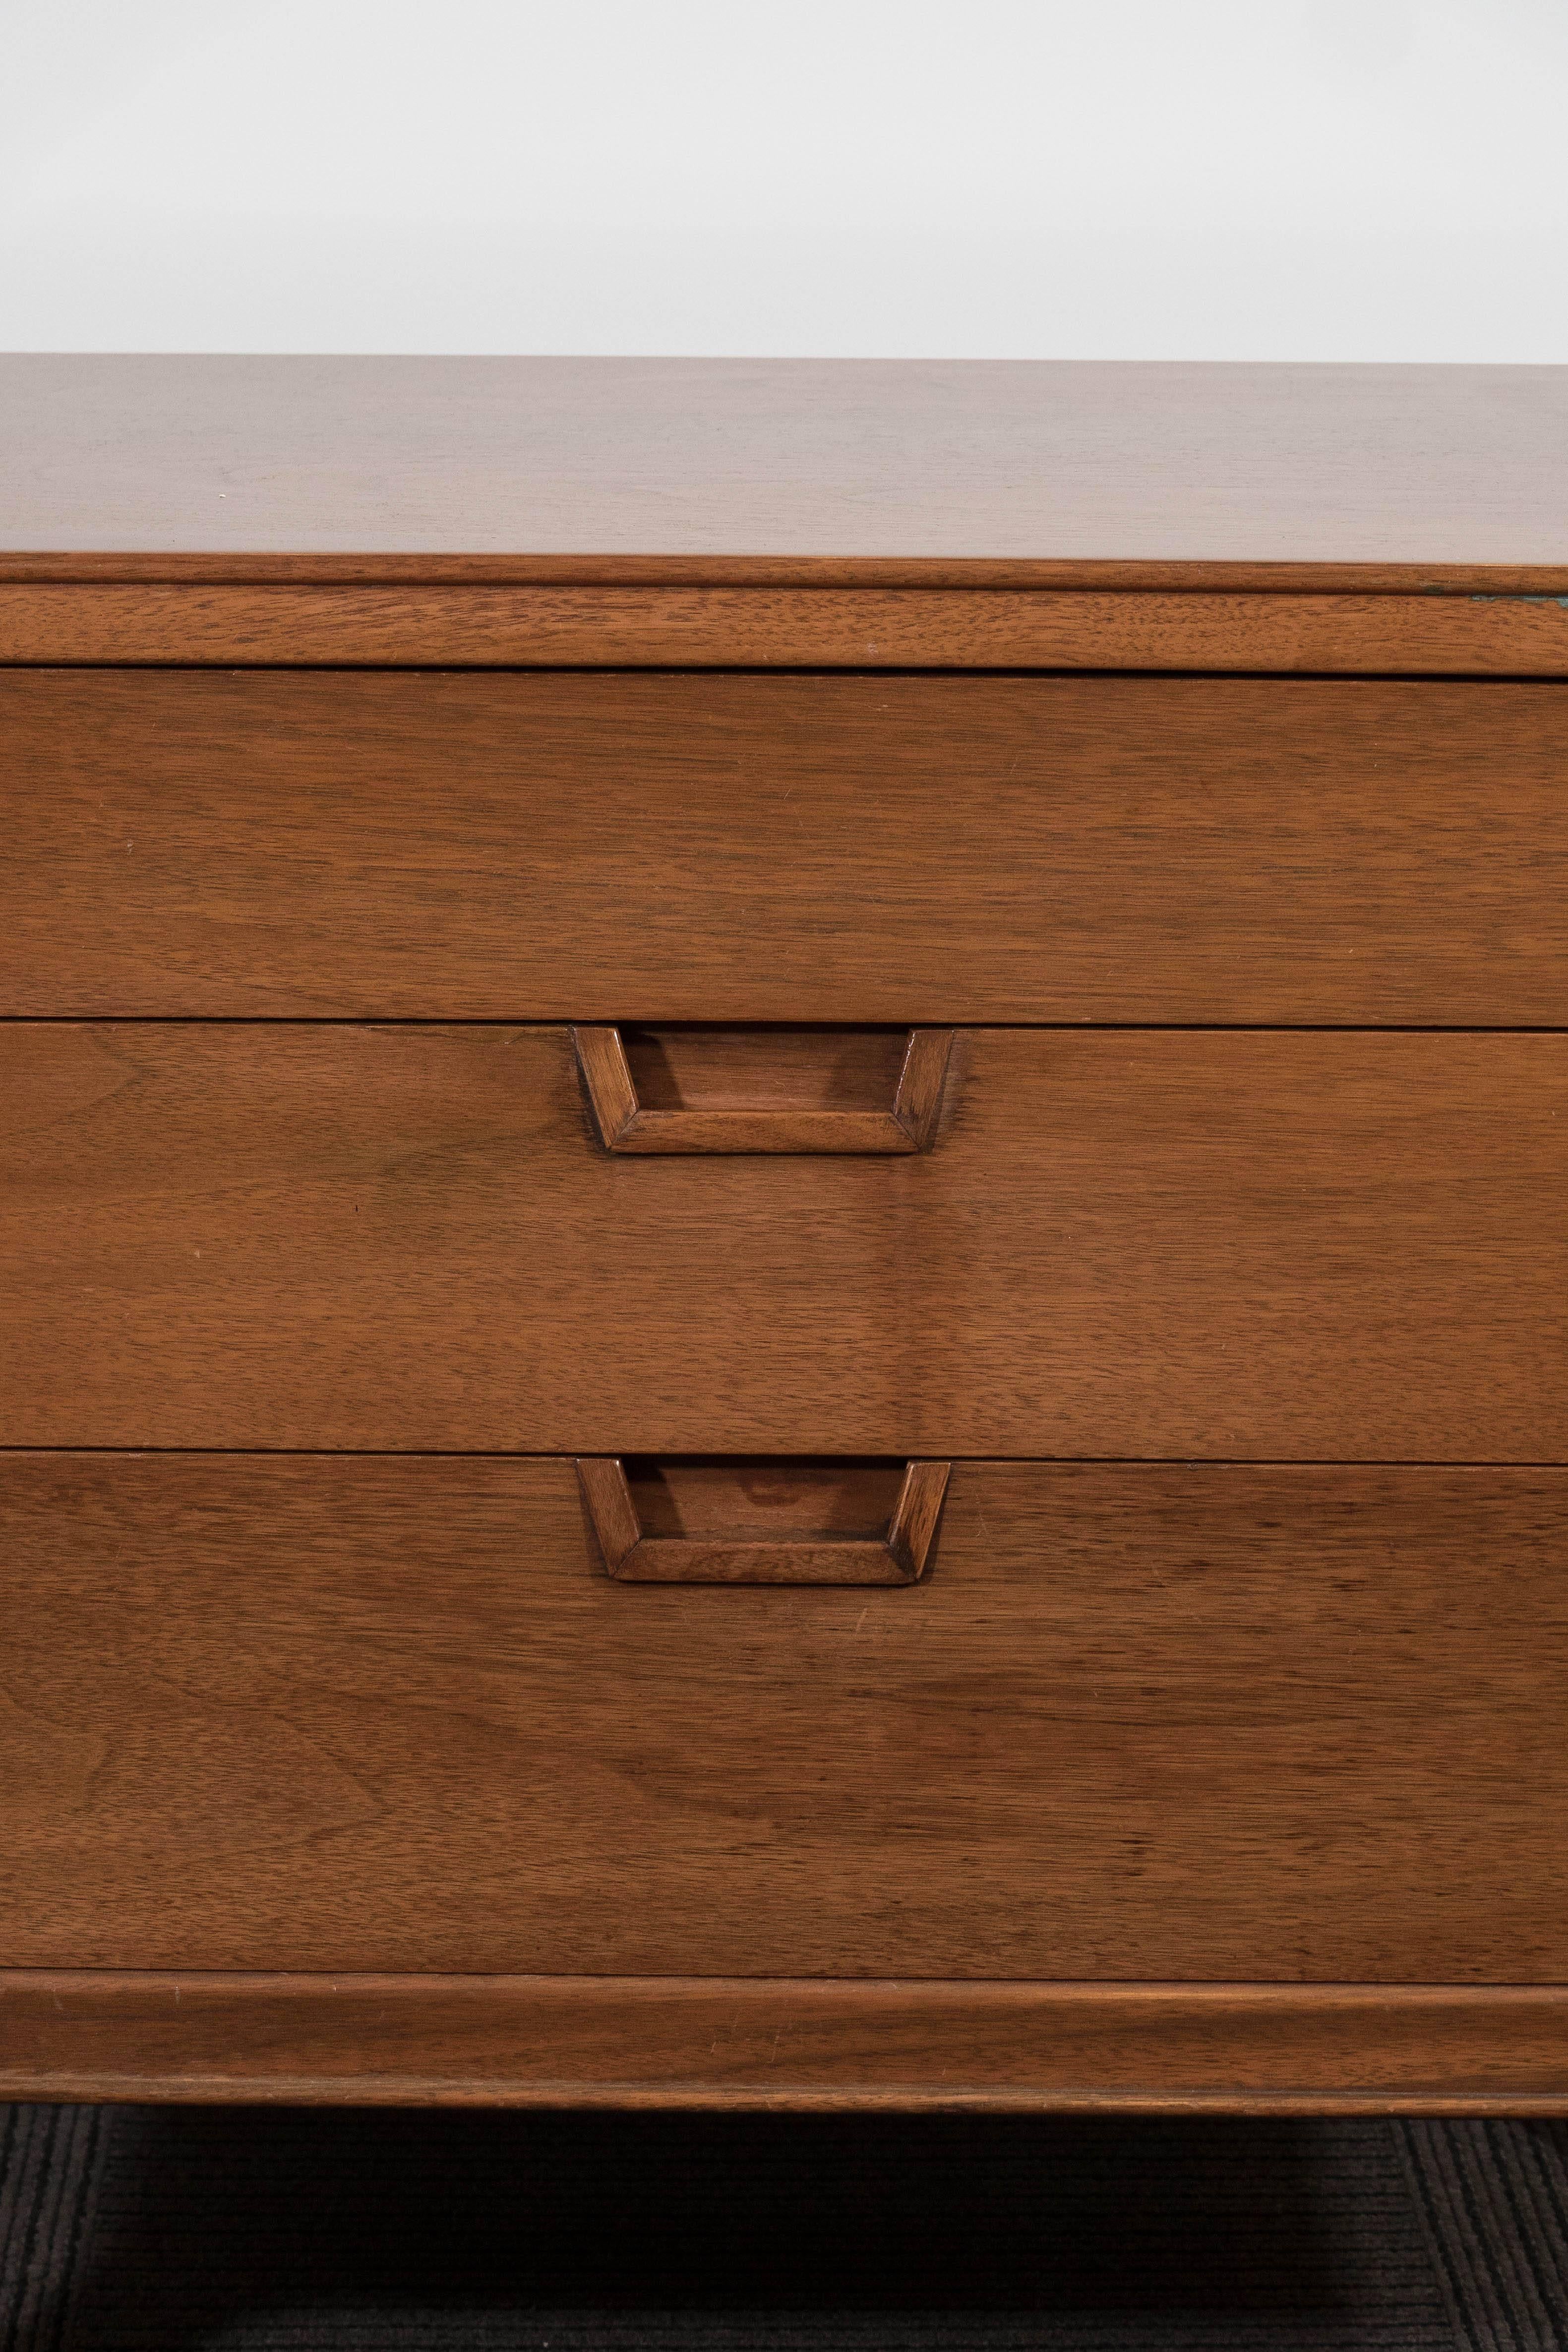 A pair of circa 1960s nightstands and end tables, by designer John Stuart for Janus Collection, in very fine wood, each with drawers, one shallow and two deeper, including recessed pulls. Markings include makers stamp [Mount Airy/Janus Collection]